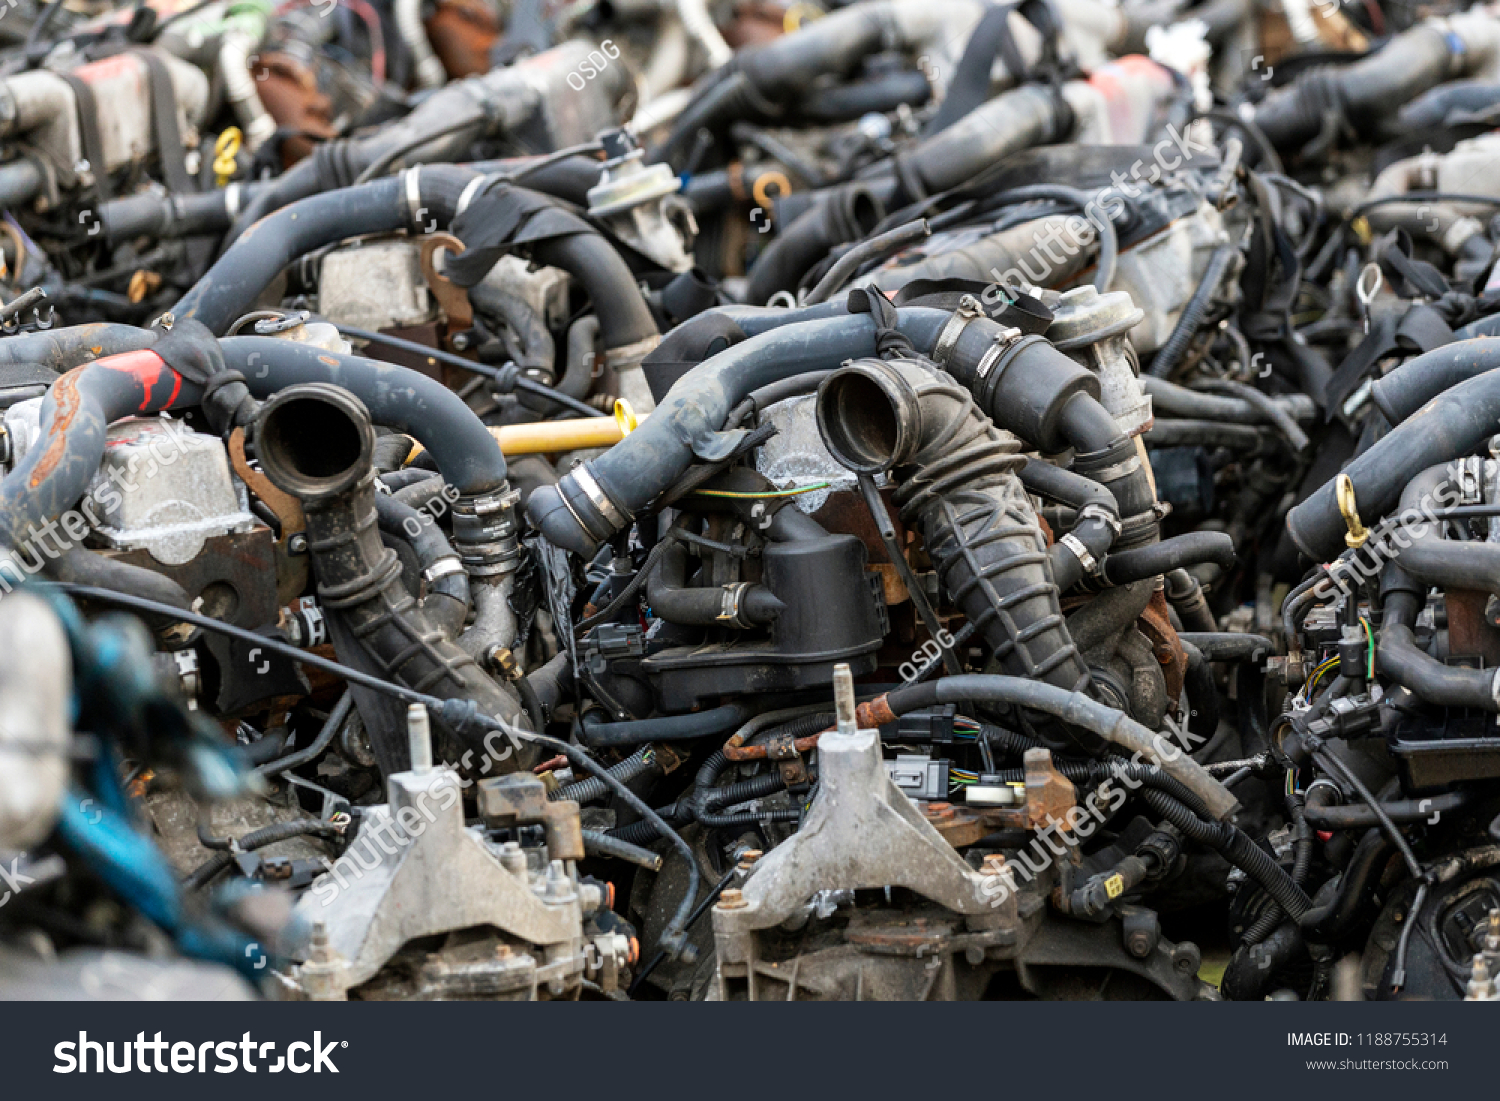 A lot of car engines. Car Assembly, spare parts trade #1188755314